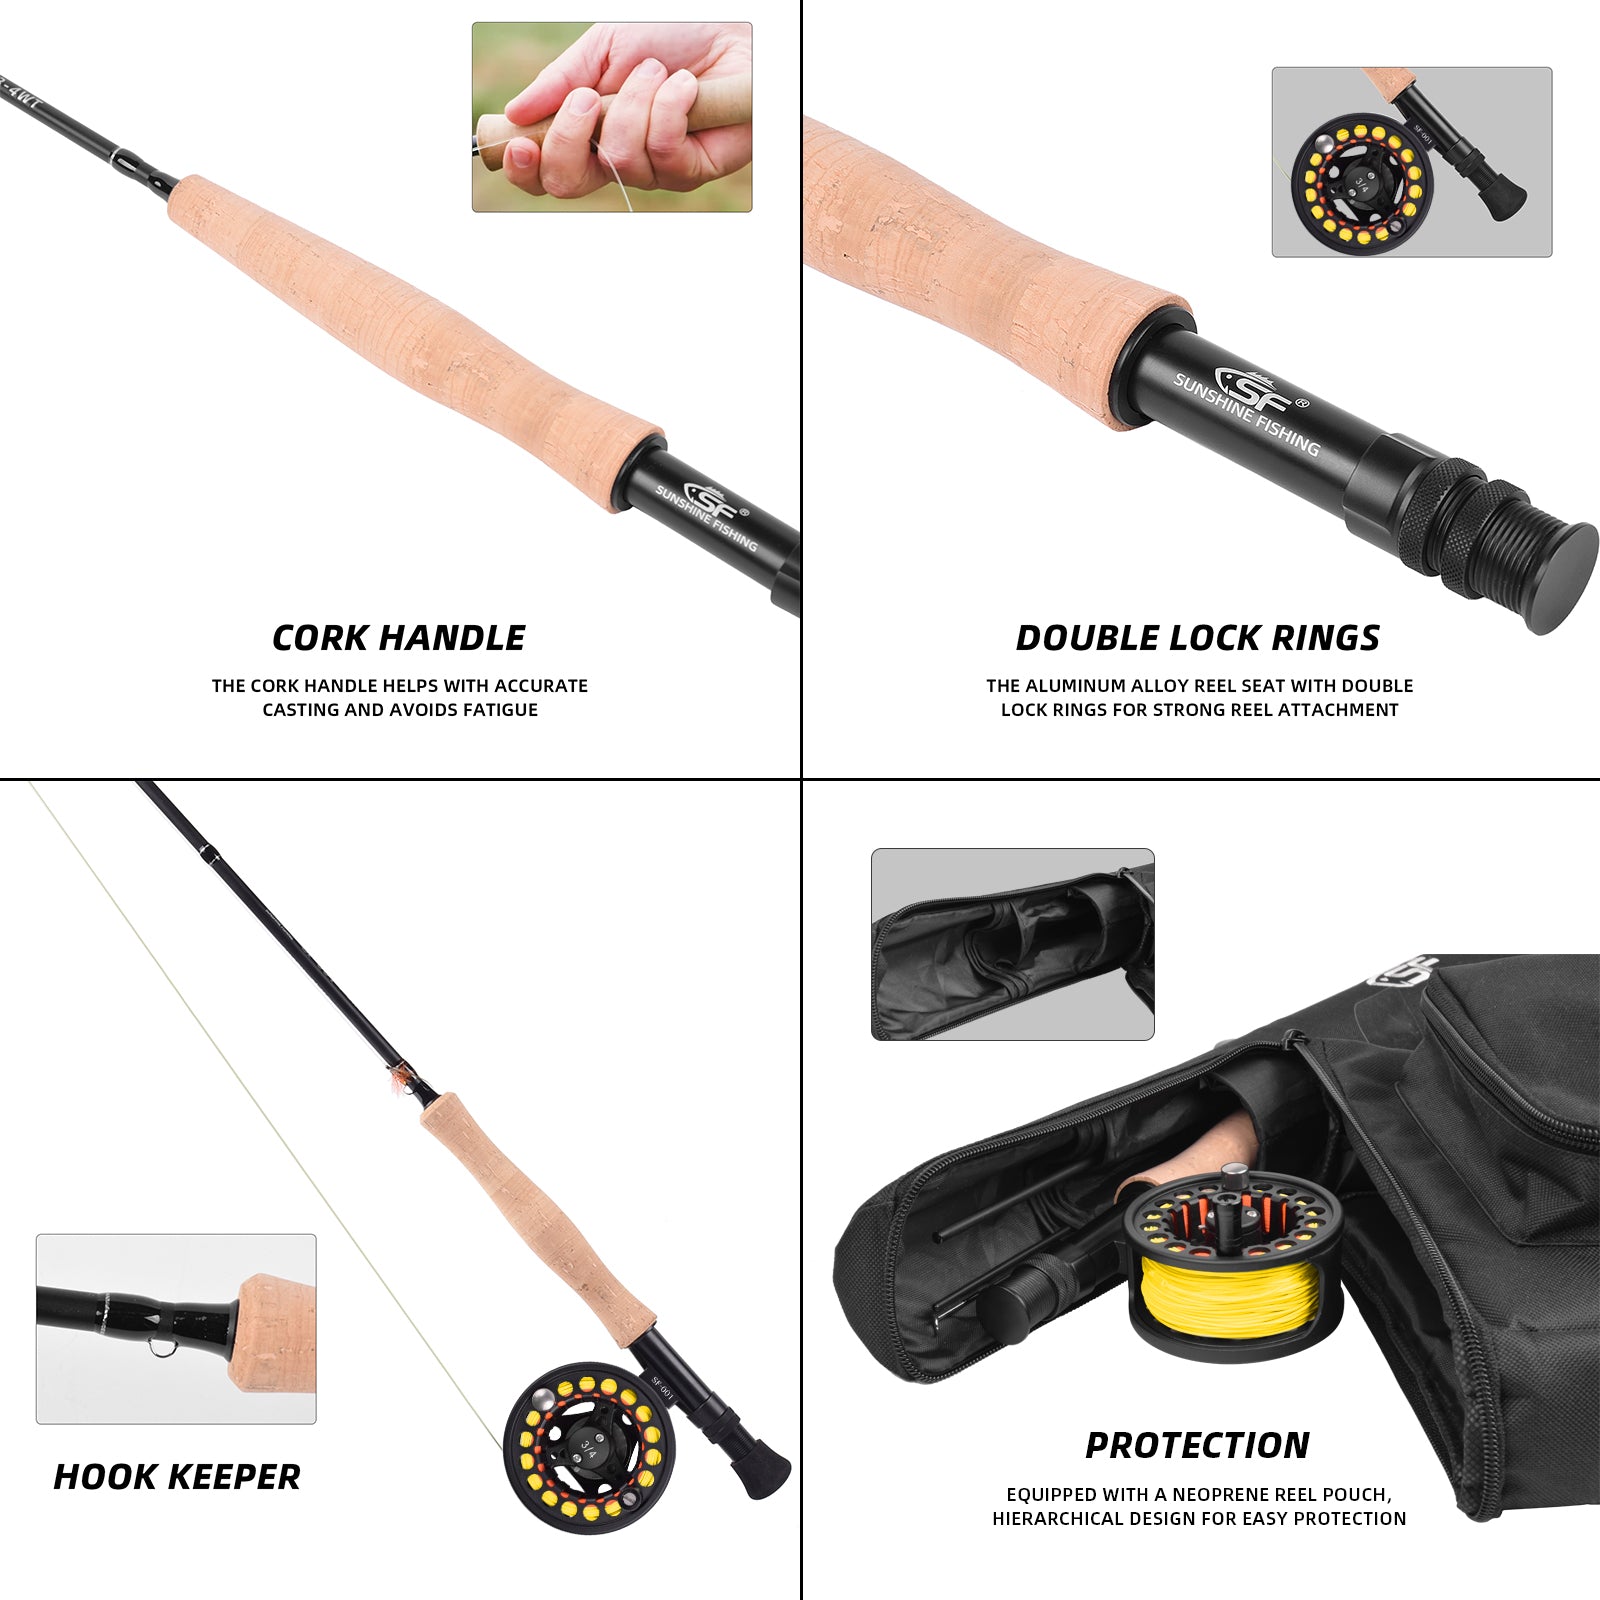 Fly fishing rod and reel combos - Canada